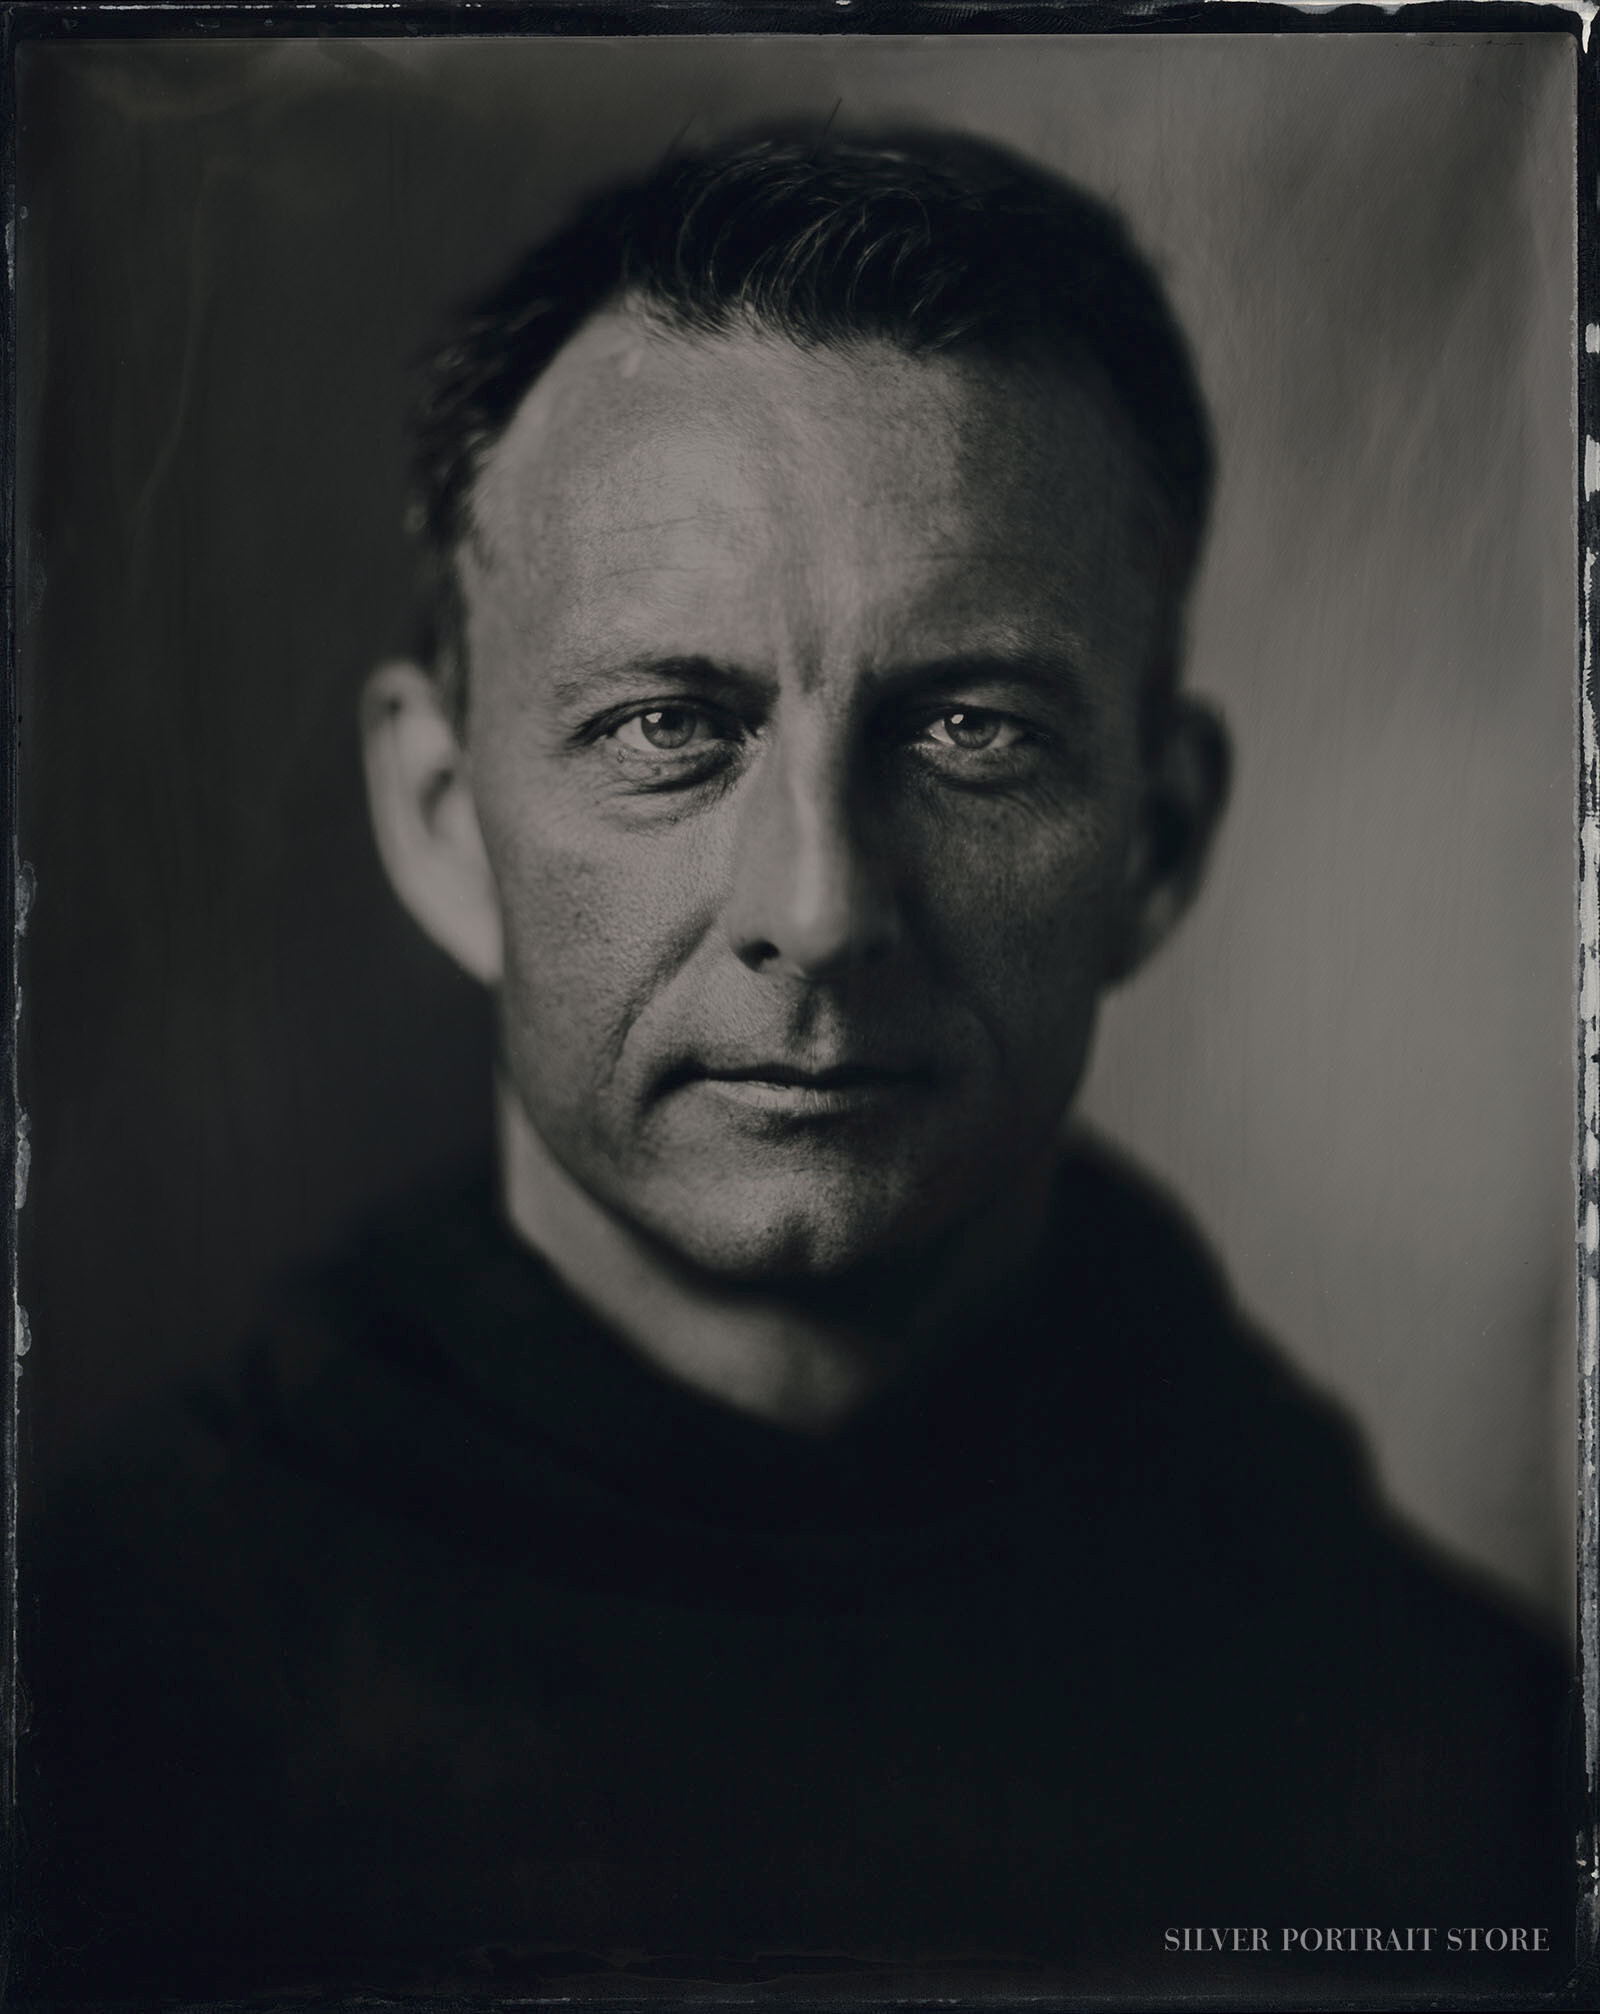 Trent-Silver Portrait Store-Scan from Wet plate collodion-Tintype 20 x 25 cm